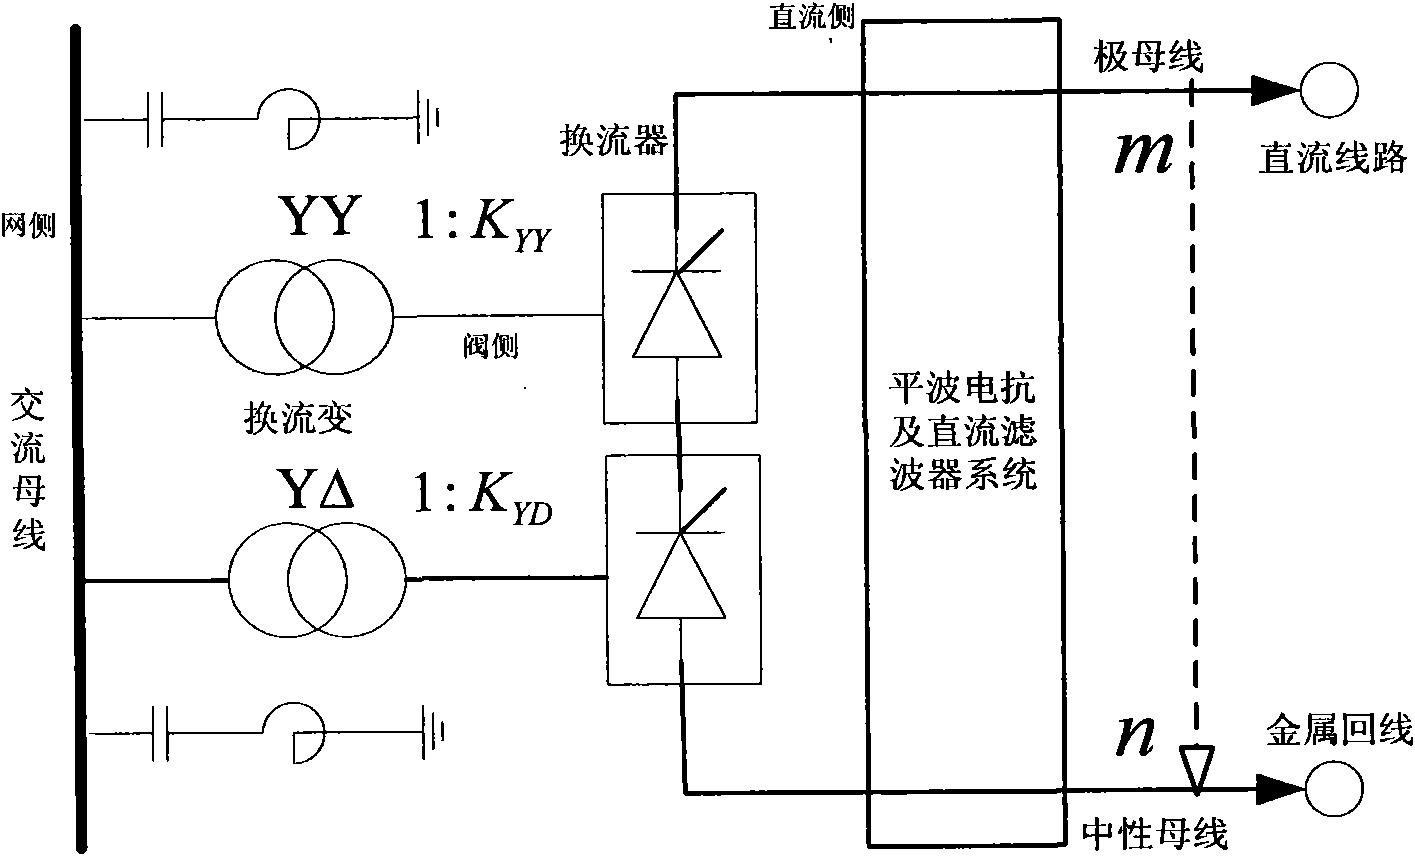 Determination method of network side harmonic current of high-voltage direct current power transmission system